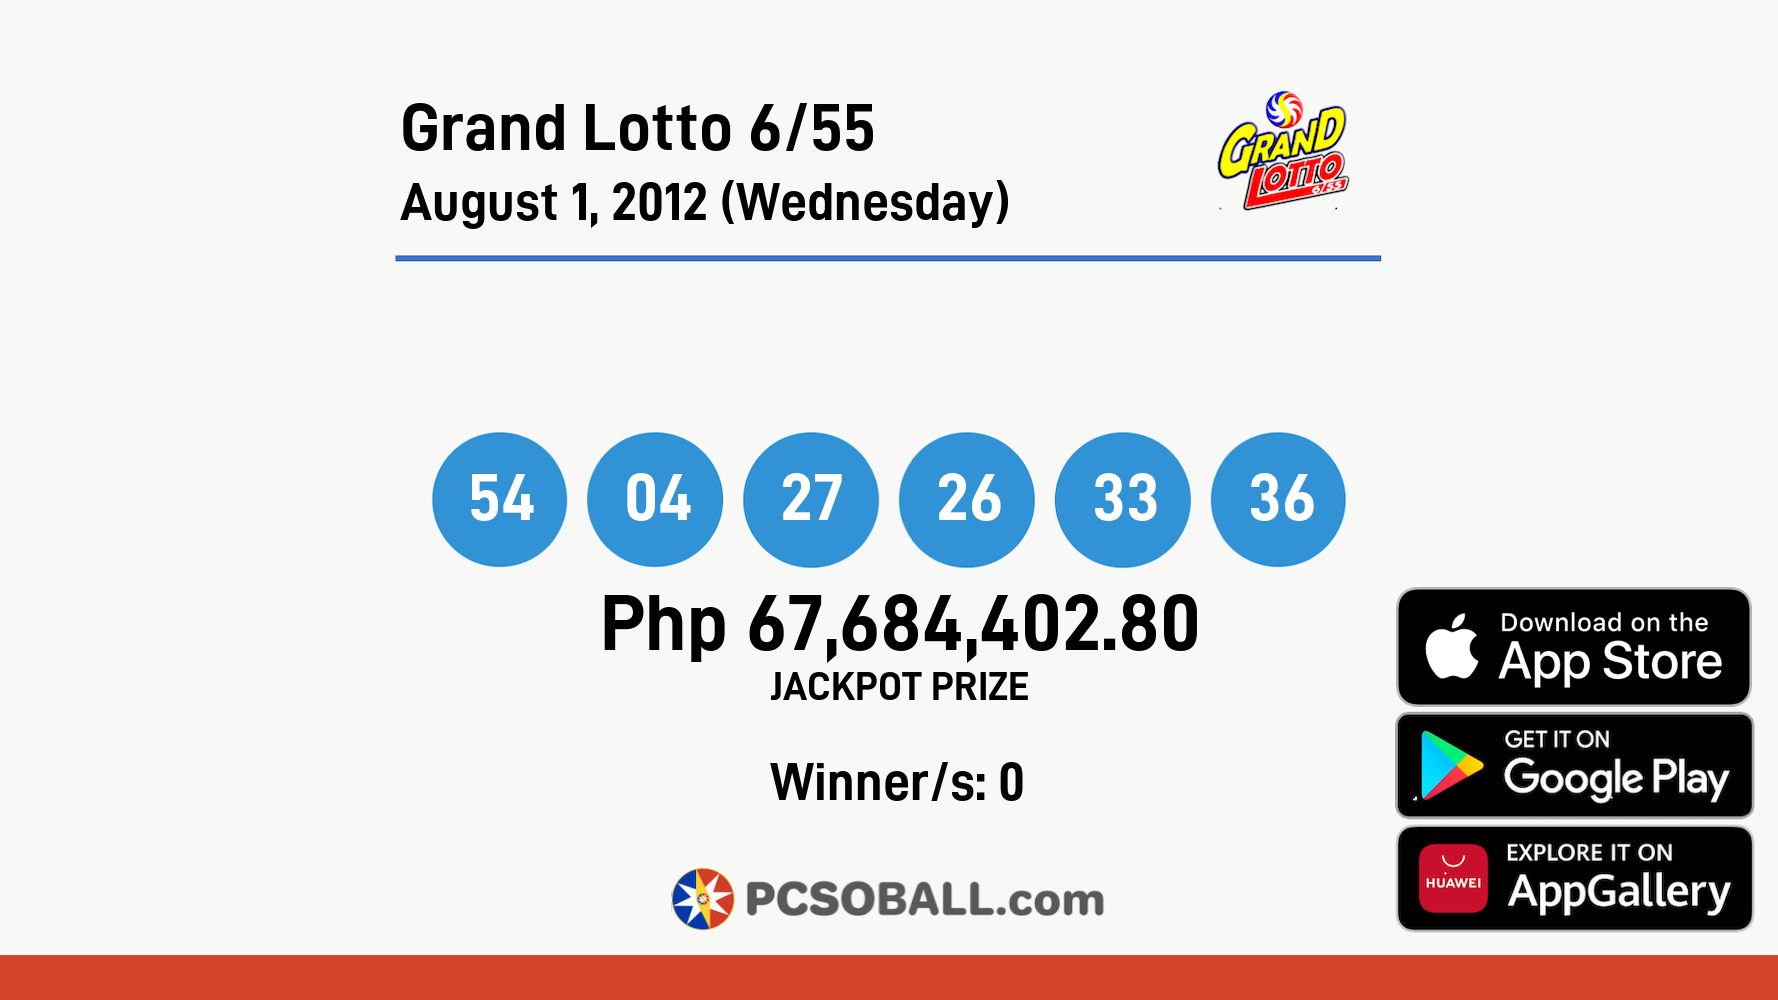 Grand Lotto 6/55 August 1, 2012 (Wednesday) Result